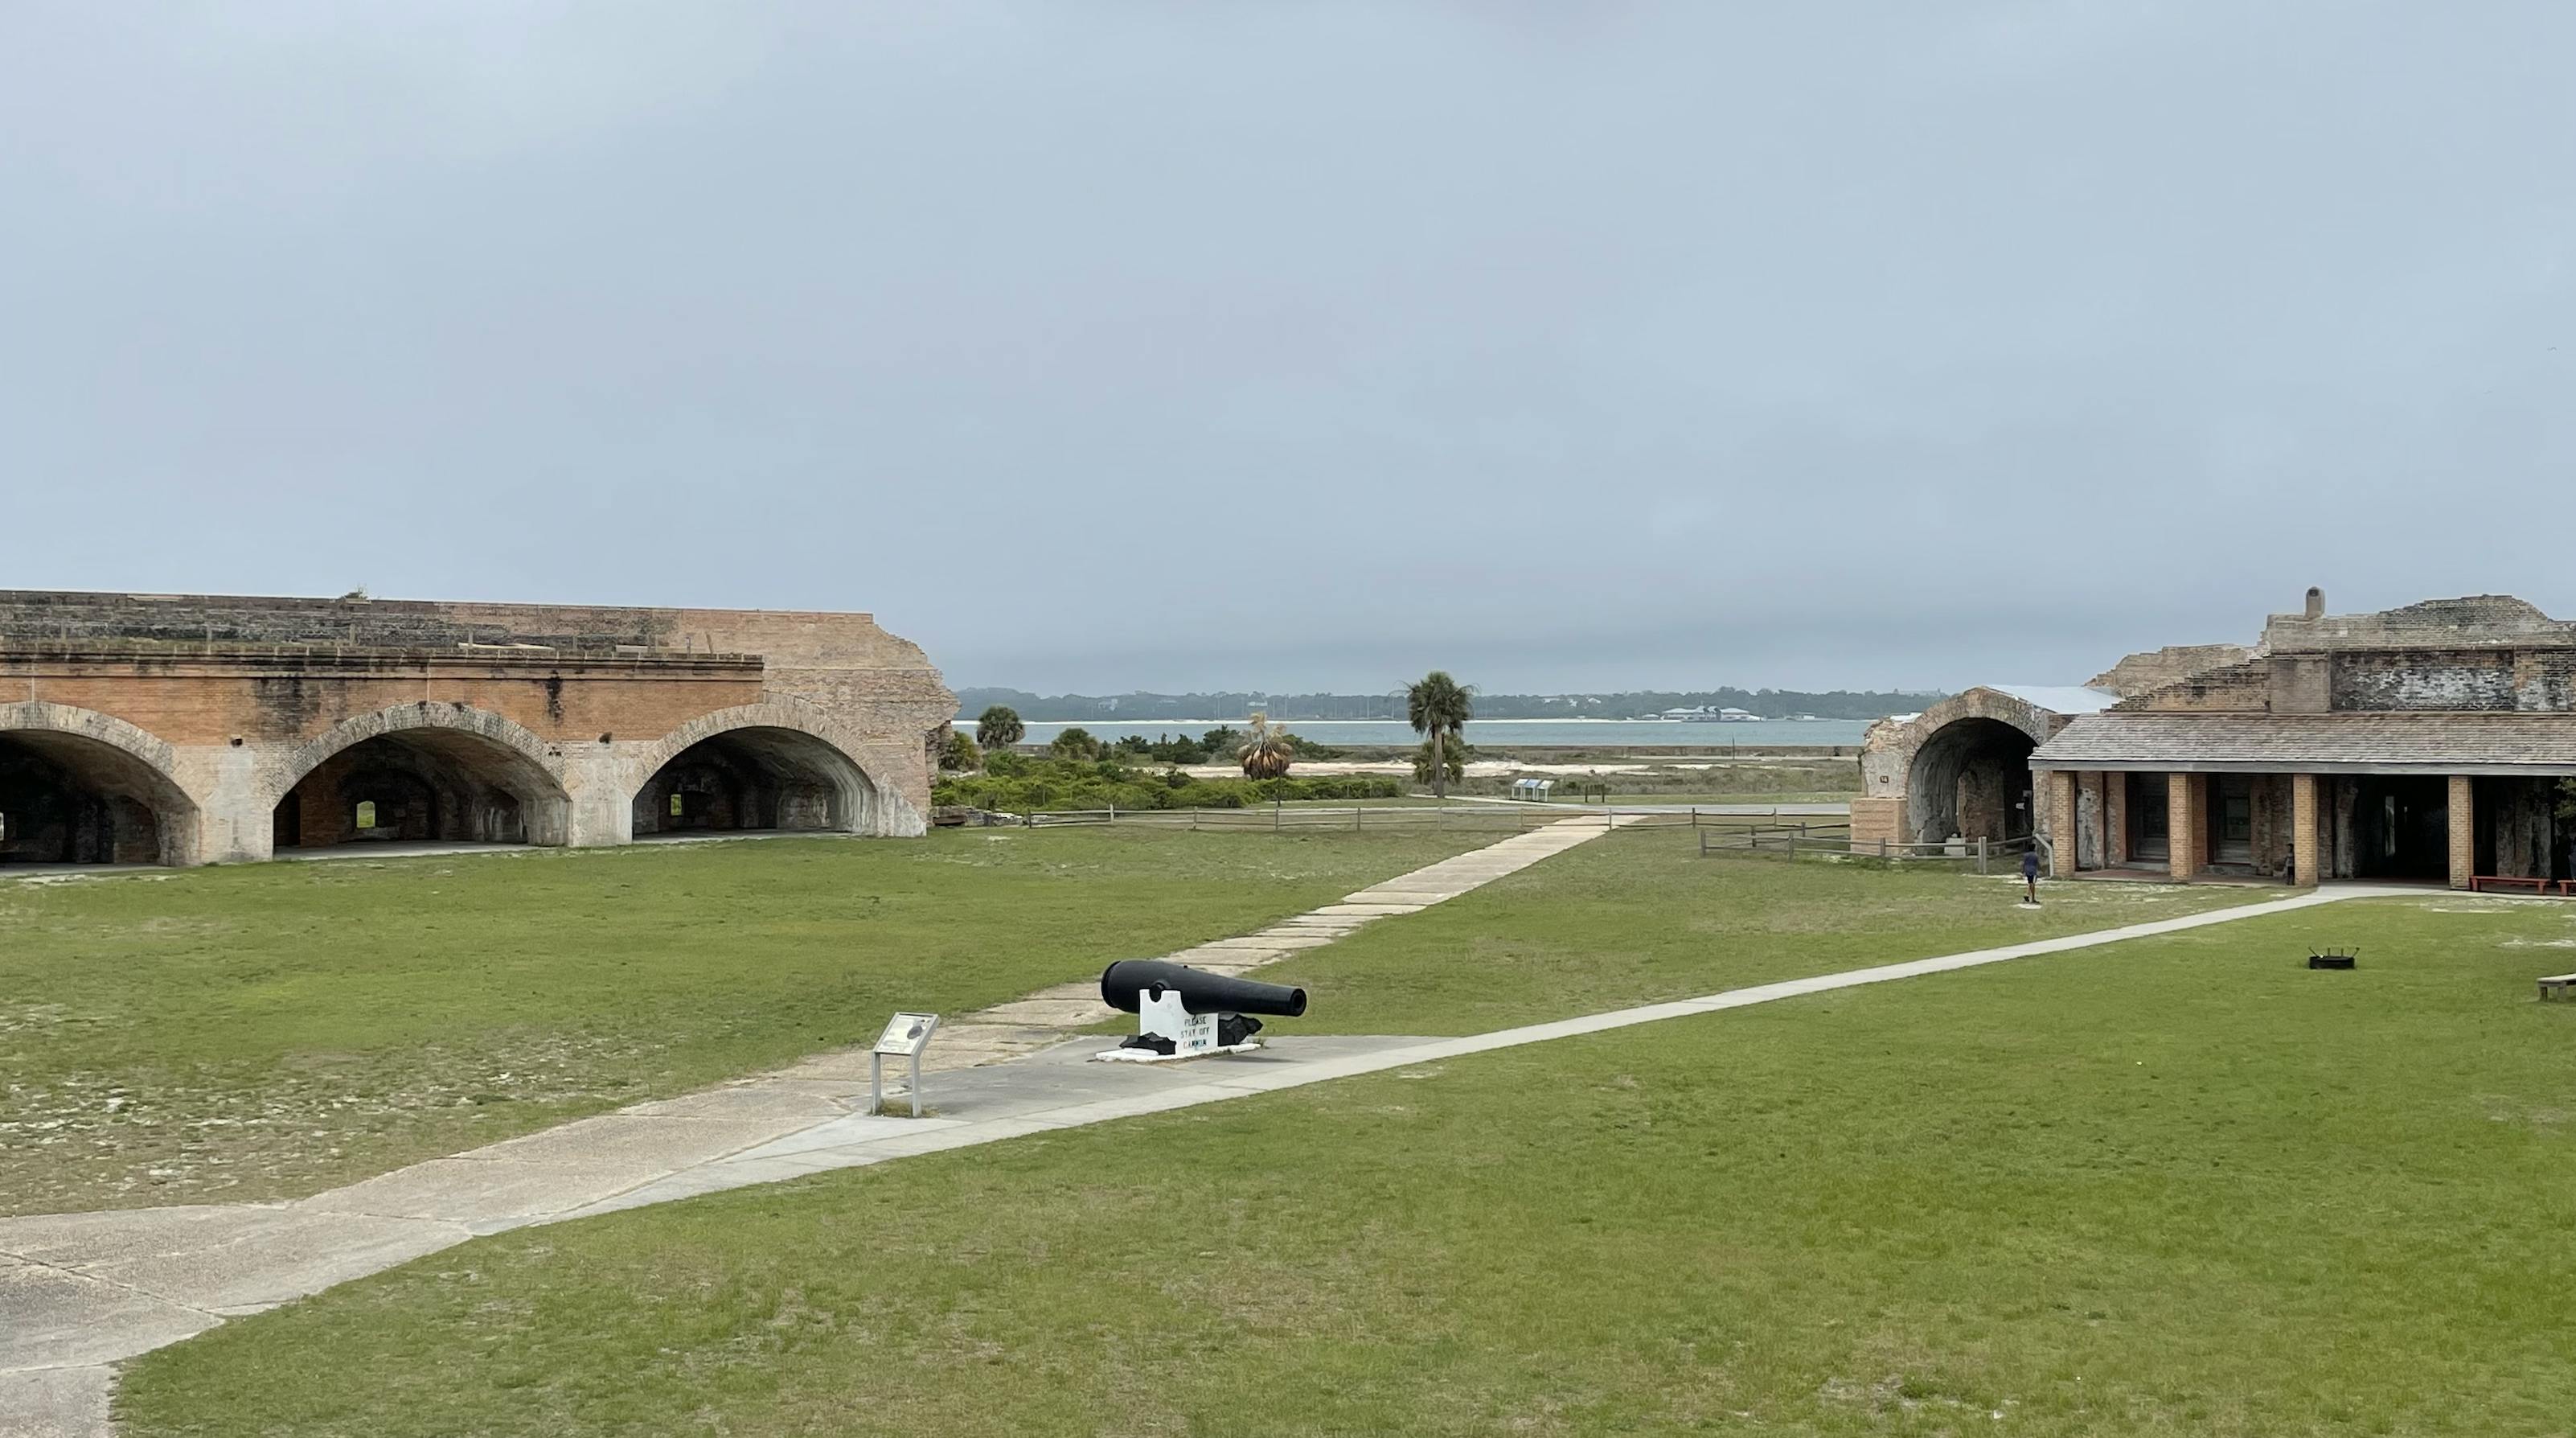 The fort at Fort Pickens in Pensacola, Florida, captured by Ben and Christina McMillan.